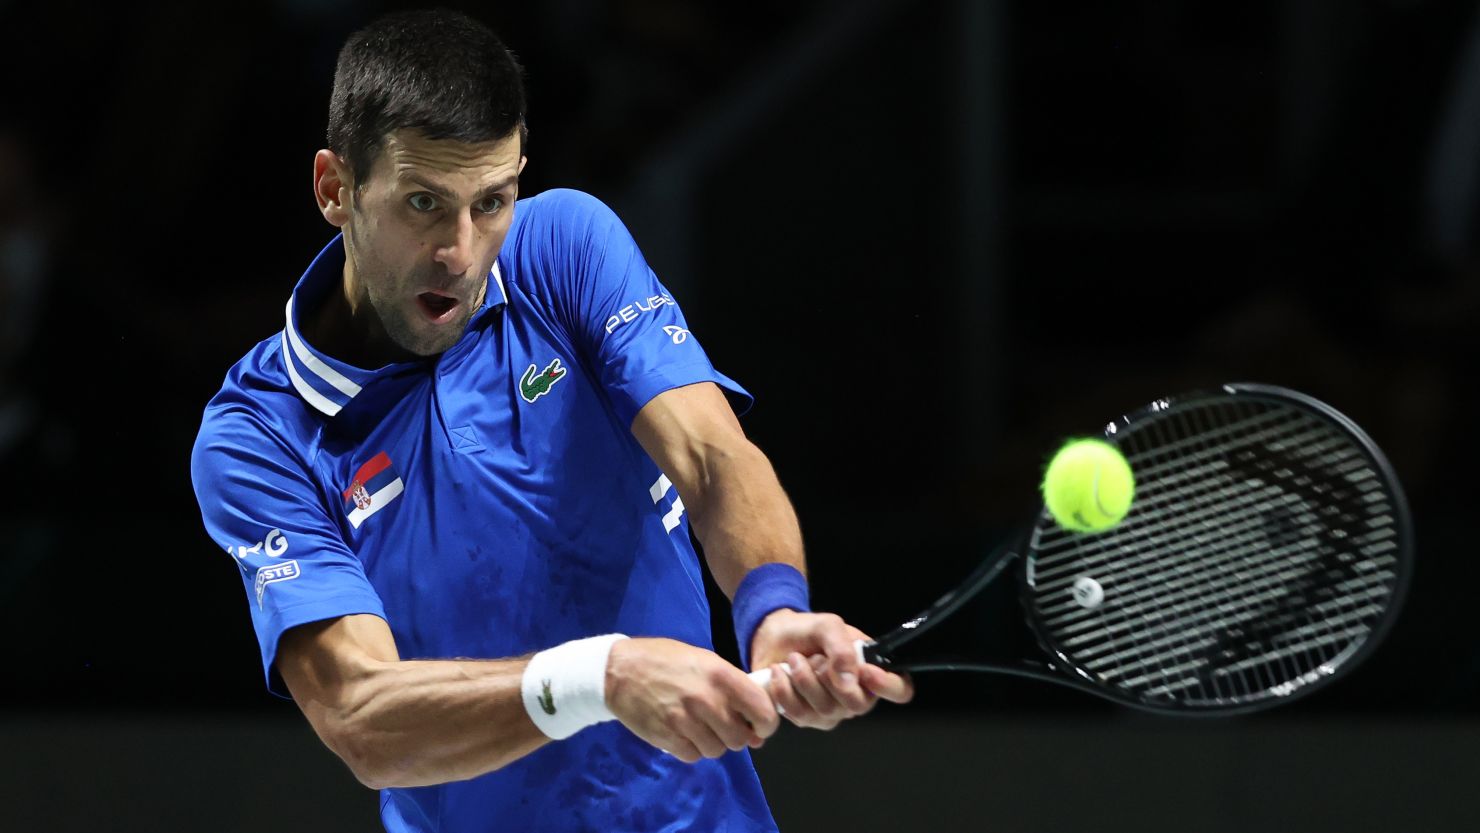 Djokovic plays a backhand during the Davis Cup semifinal between Serbia and Croatia in Madrid on December 3.